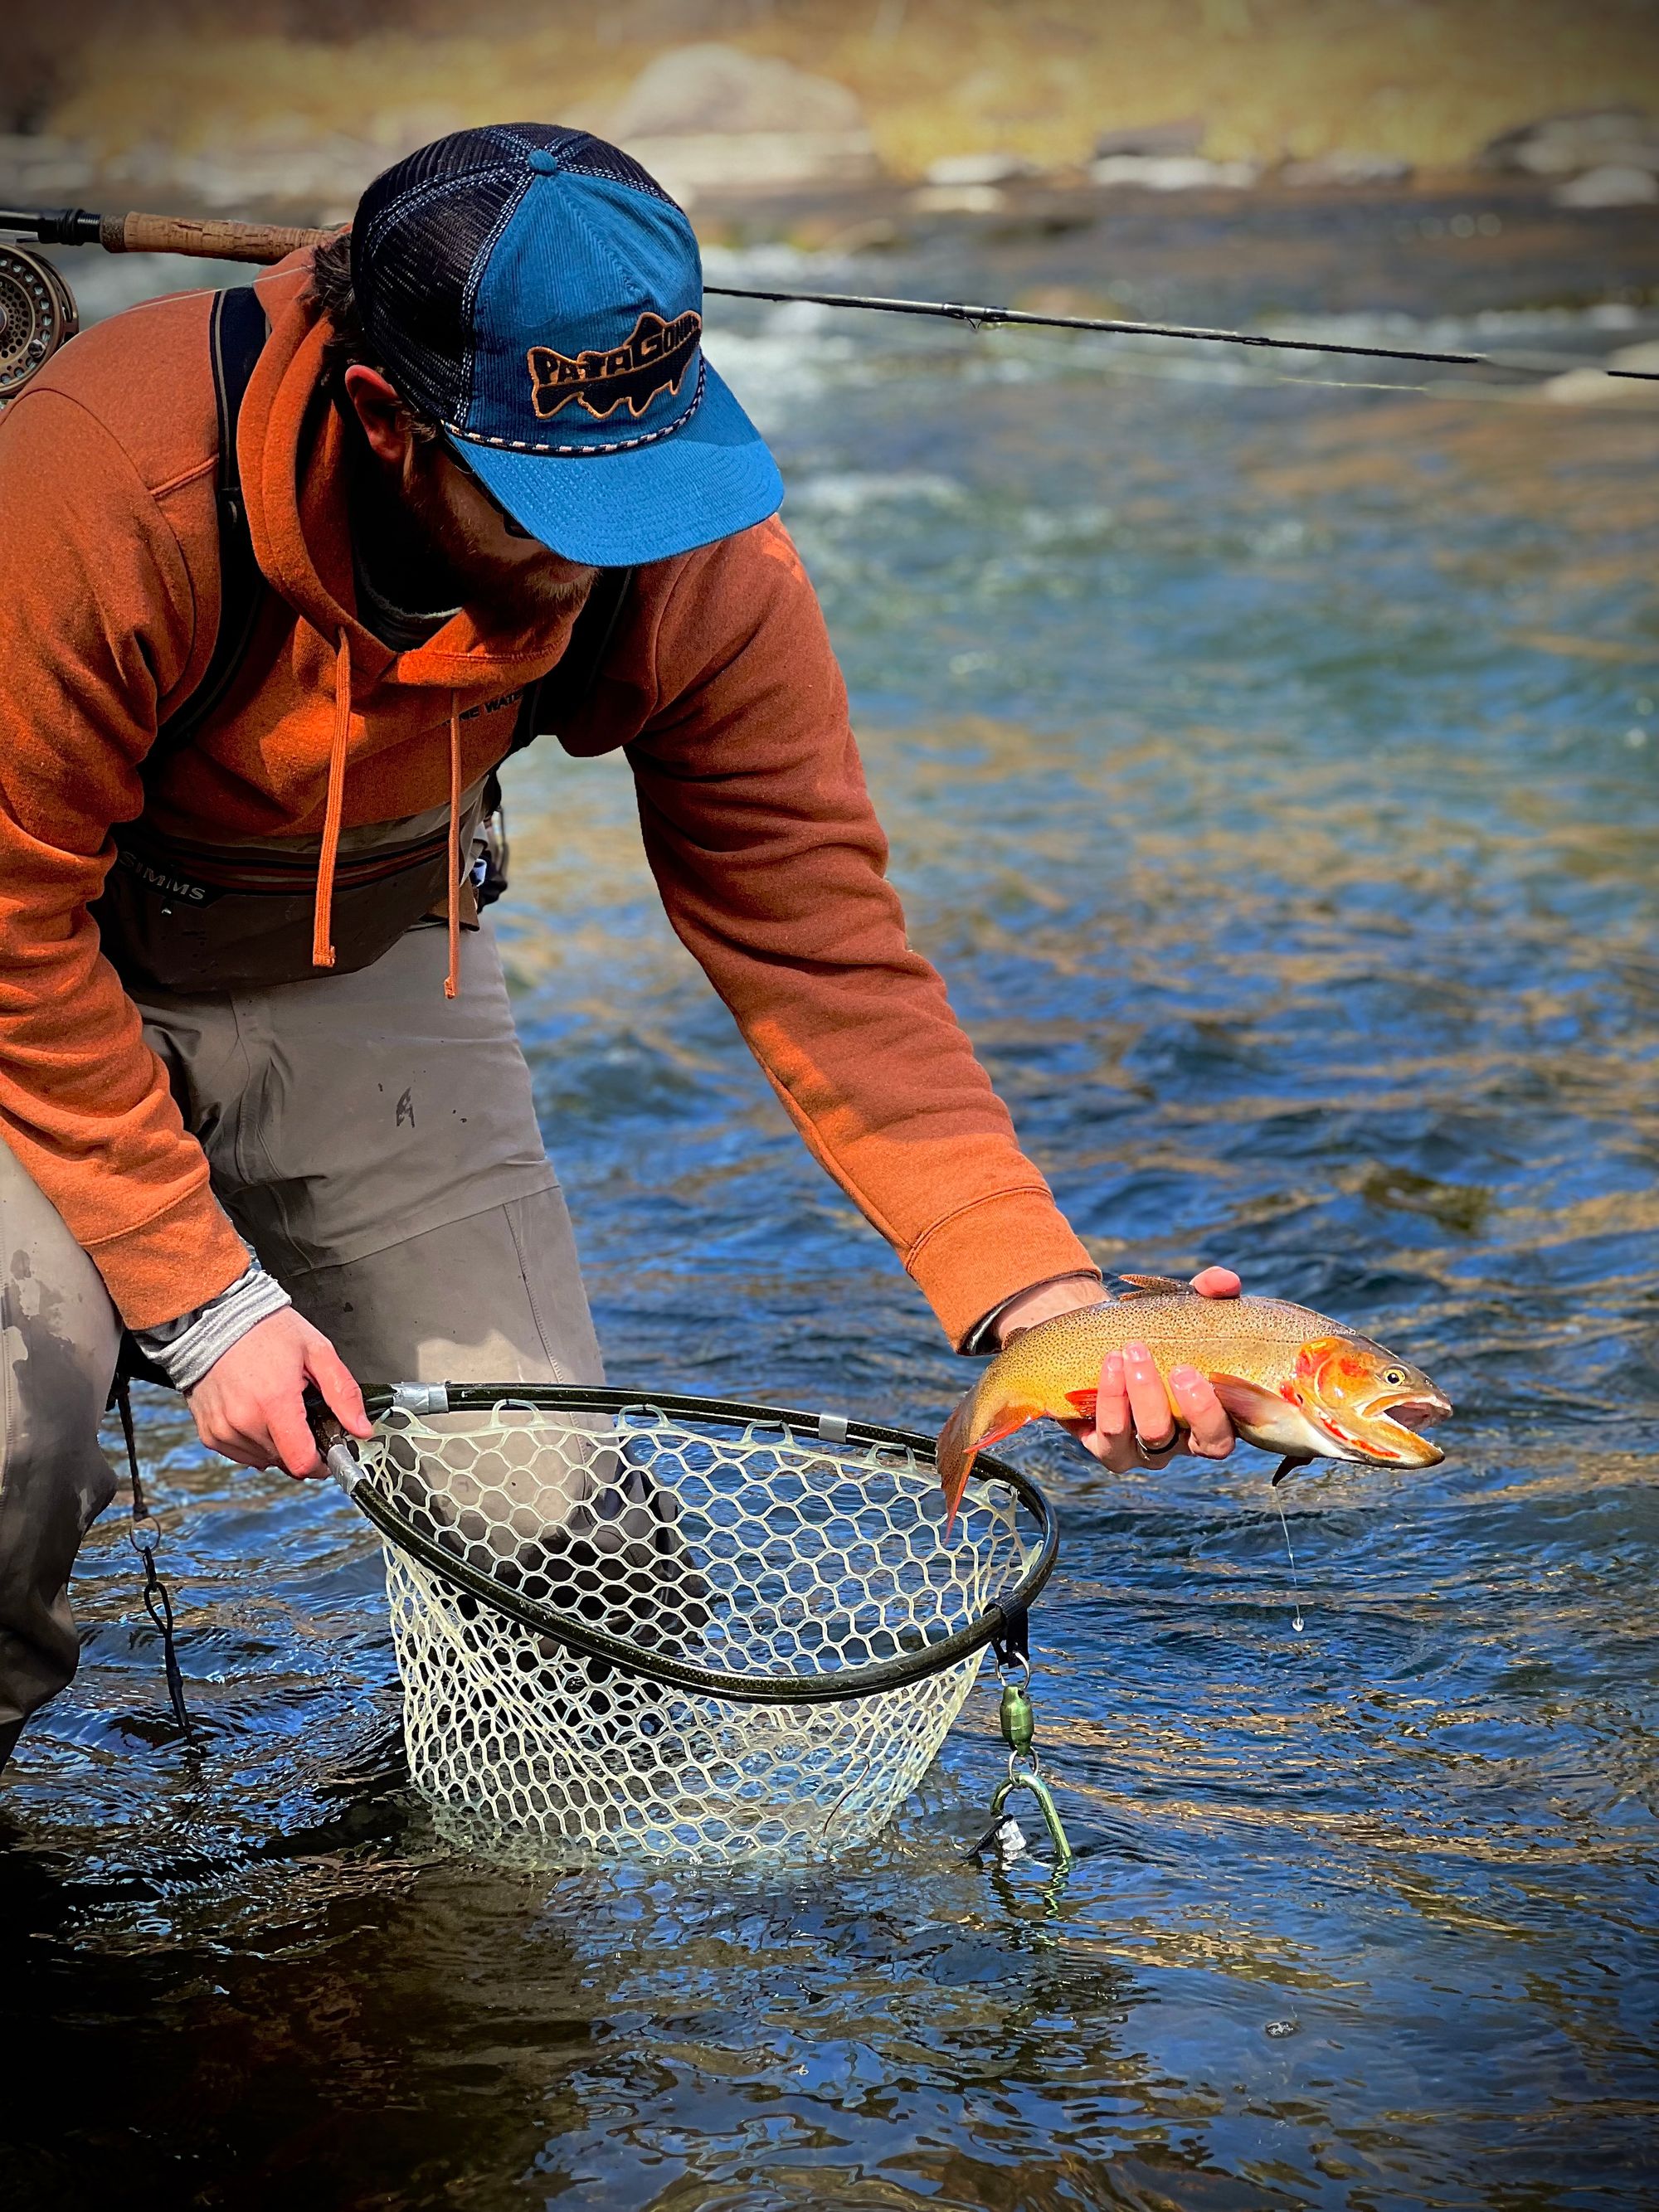 Story From the Road: Third Time Makes the Pattern (Fly Fishing Story)